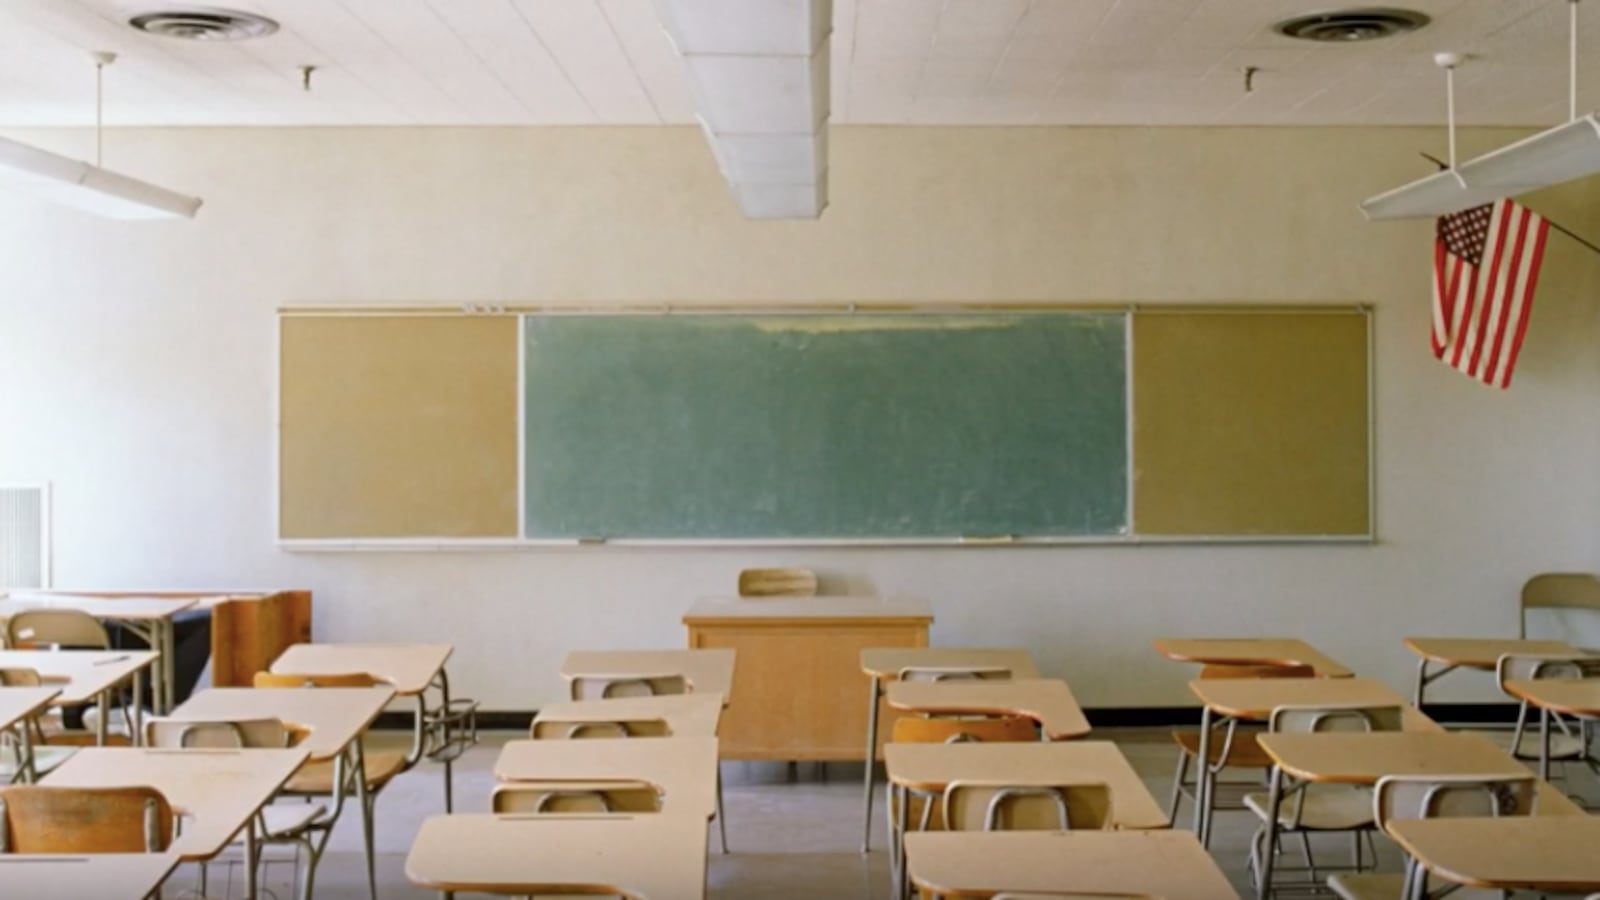 An image from an XQ video, intended to support the claim that American high schools are outdated.